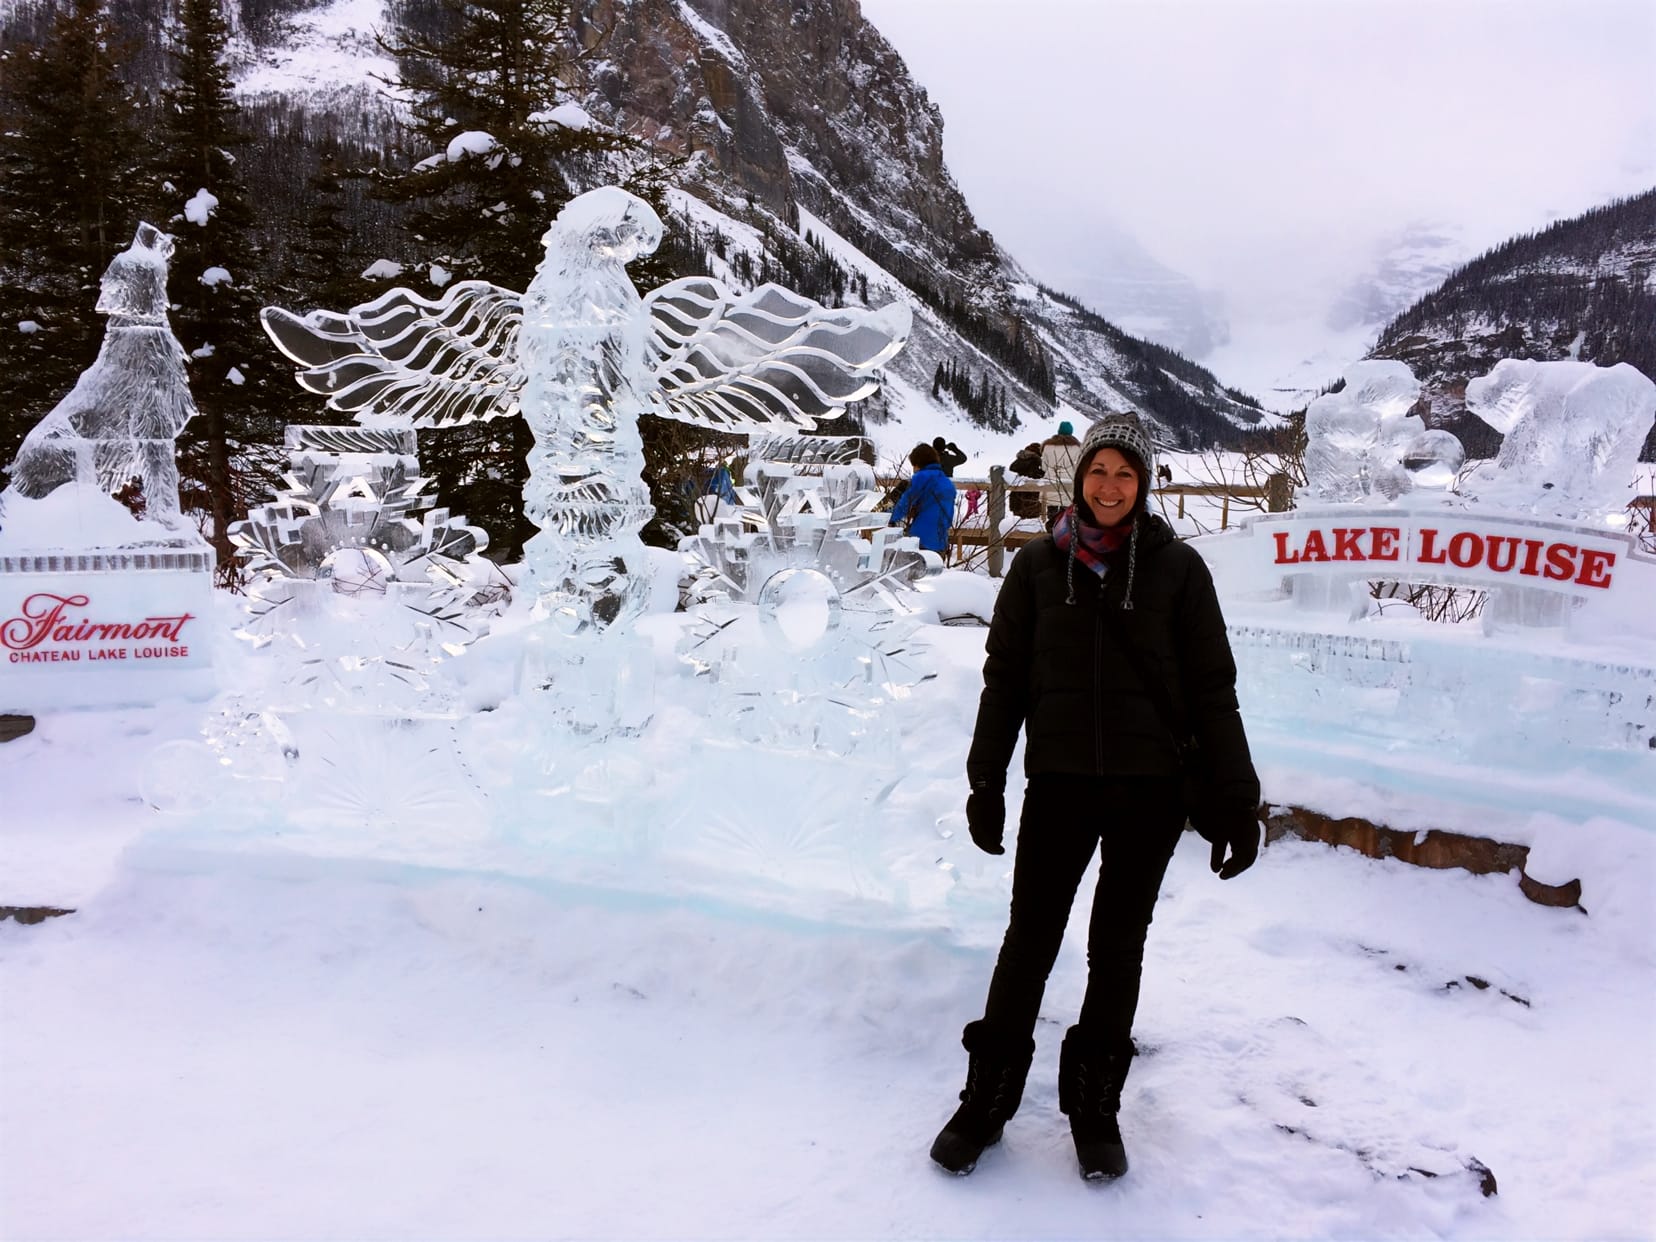 Shelley at Lake louise beside ice sculptures